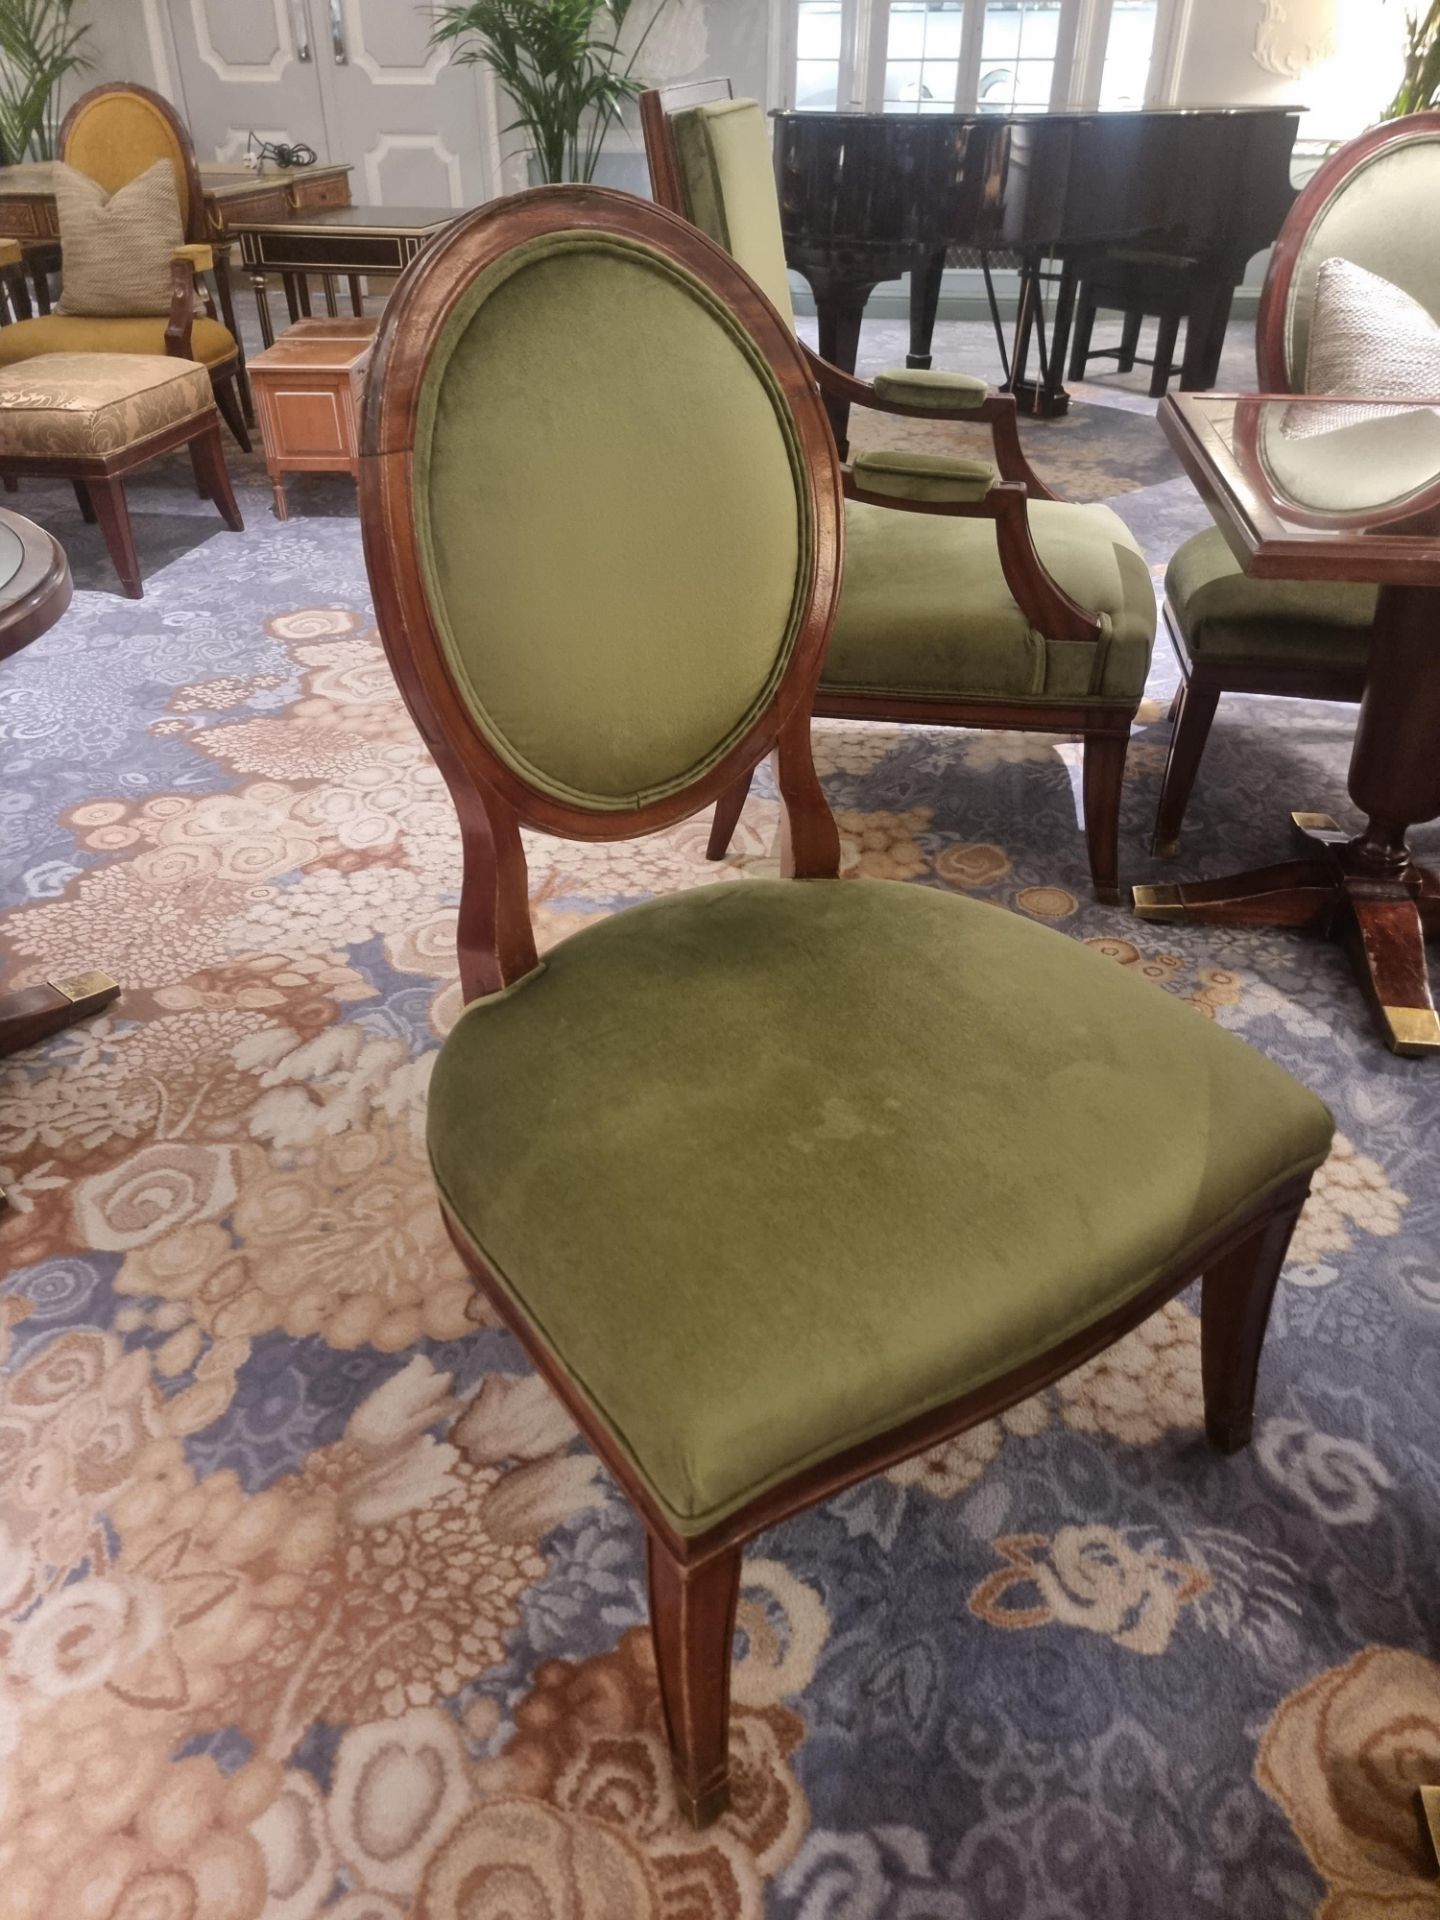 Louis XVI Style Framed And Upholstered Chair In Lelievre Paris Olive Green Salon Chair 68 x 68 x - Bild 2 aus 3